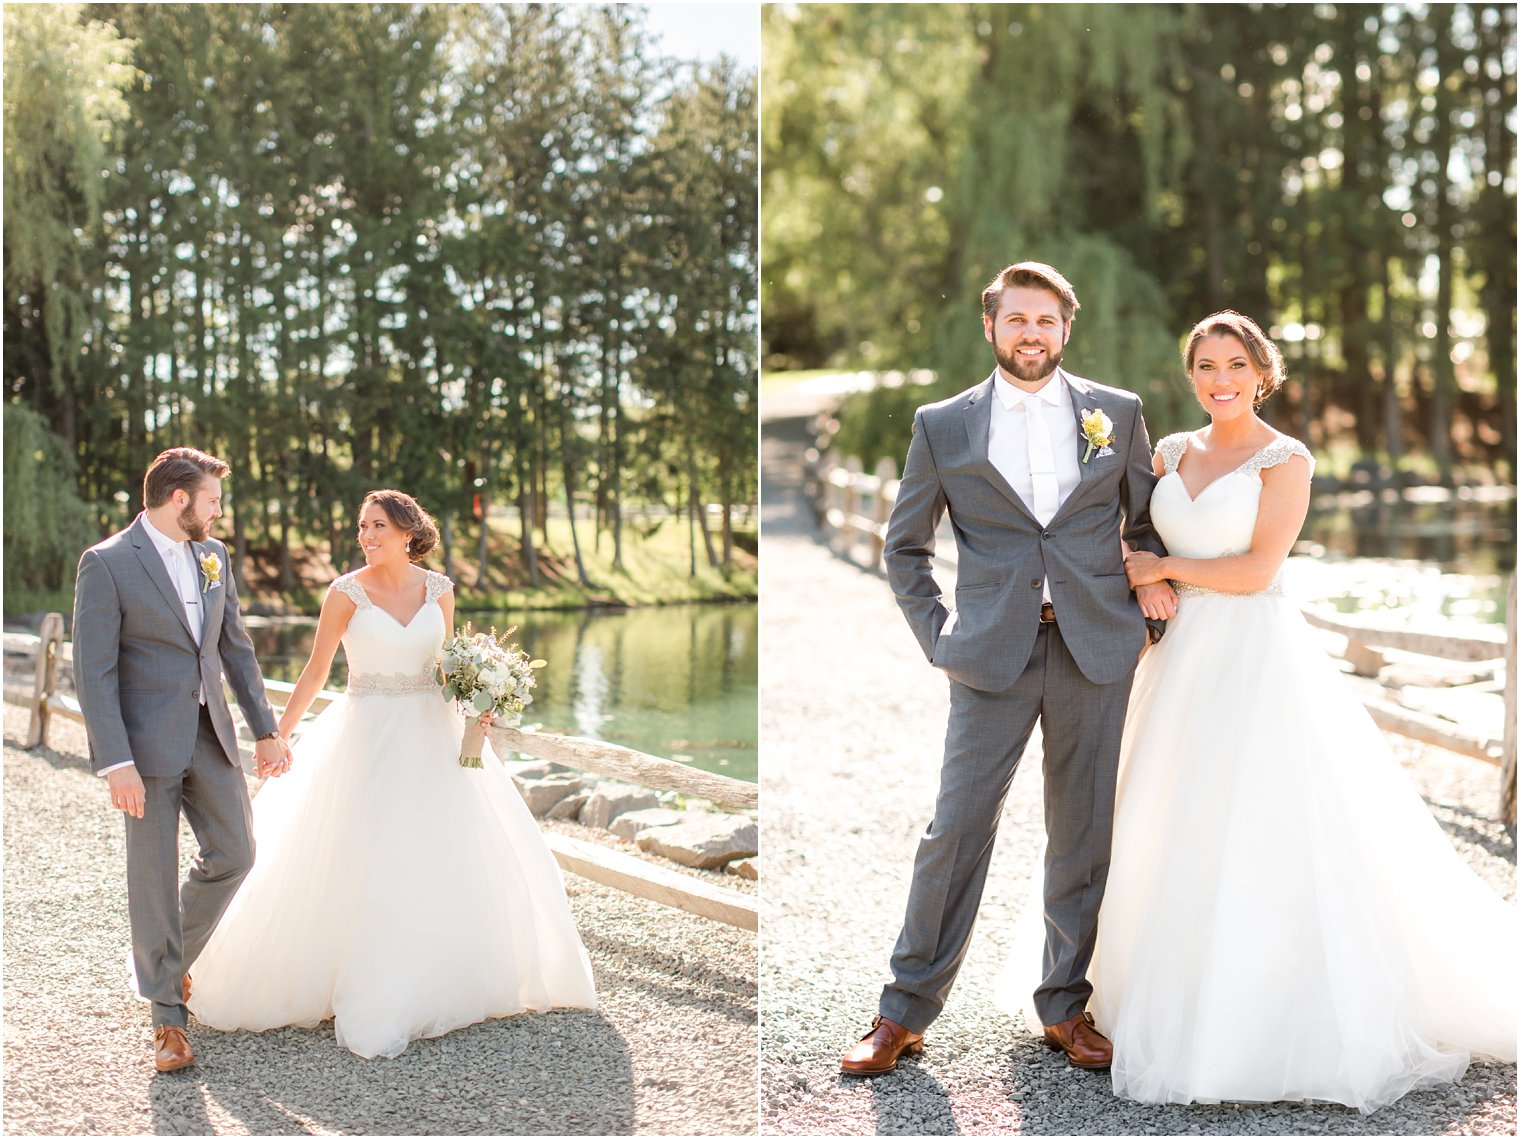 Bride and groom photos at Windows on the Water at Frogbridge Wedding